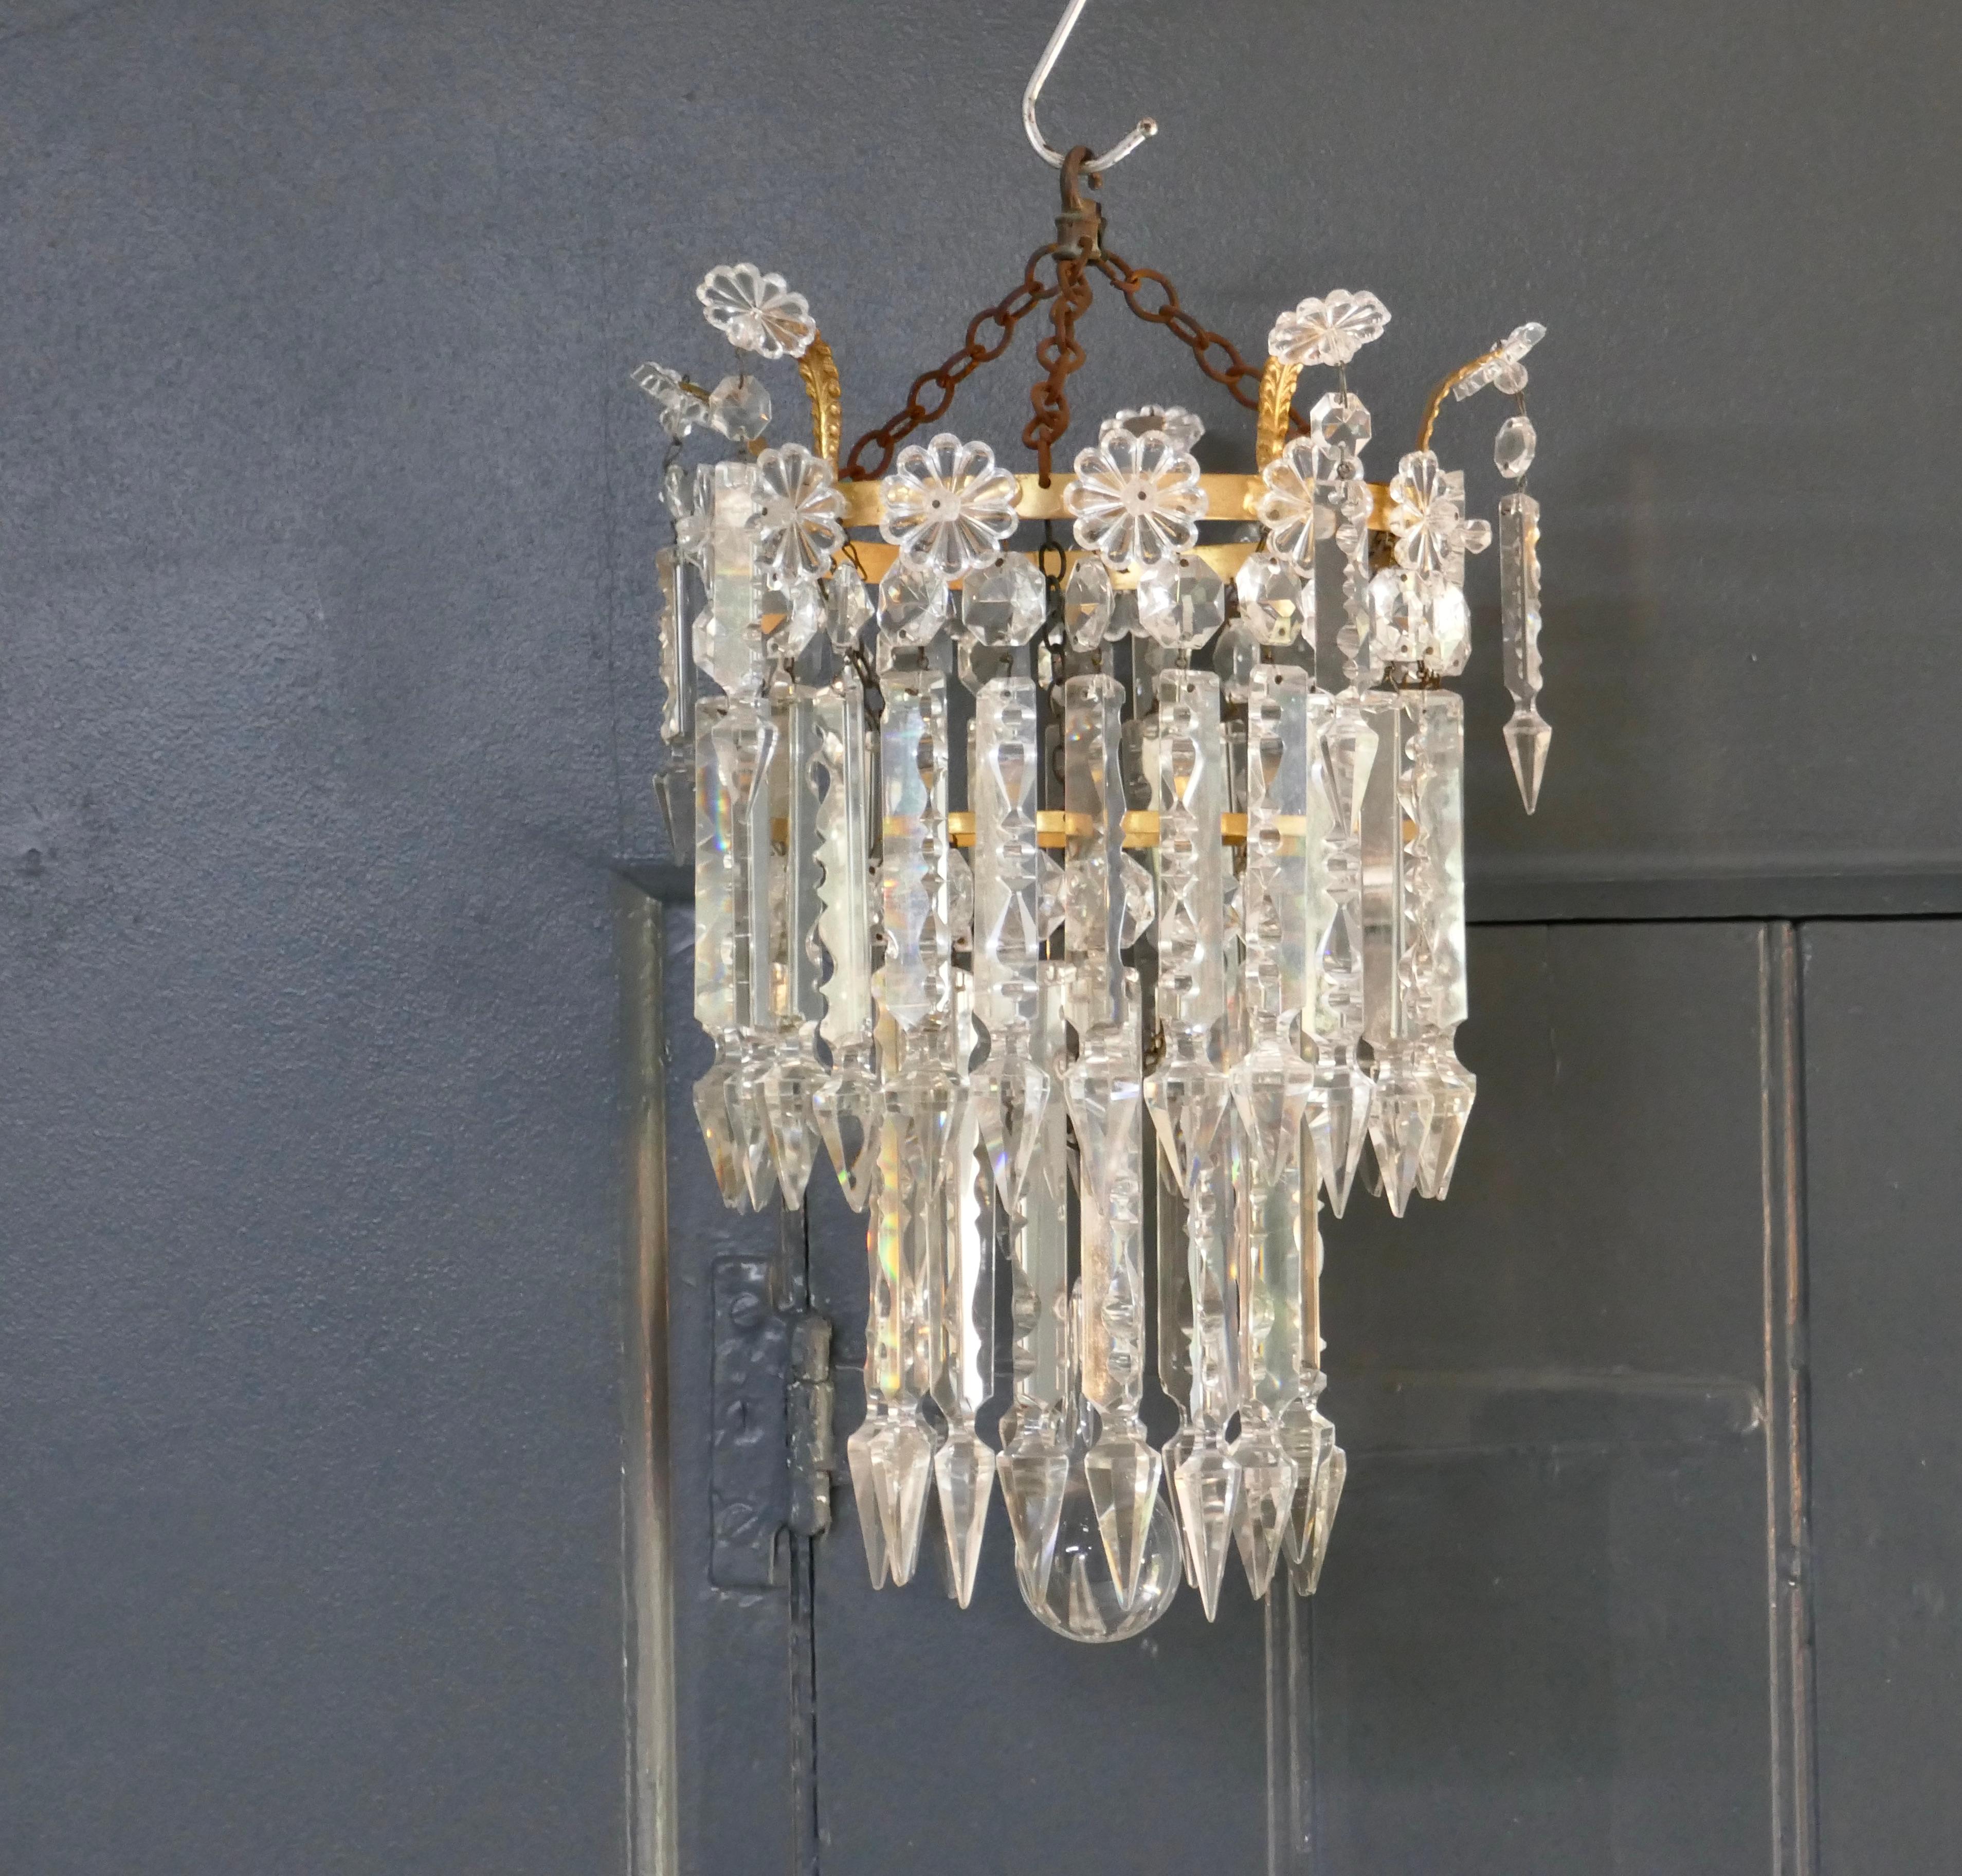 A Stunning Waterfall 2 Tier Crystal Chandelier    In Good Condition For Sale In Chillerton, Isle of Wight